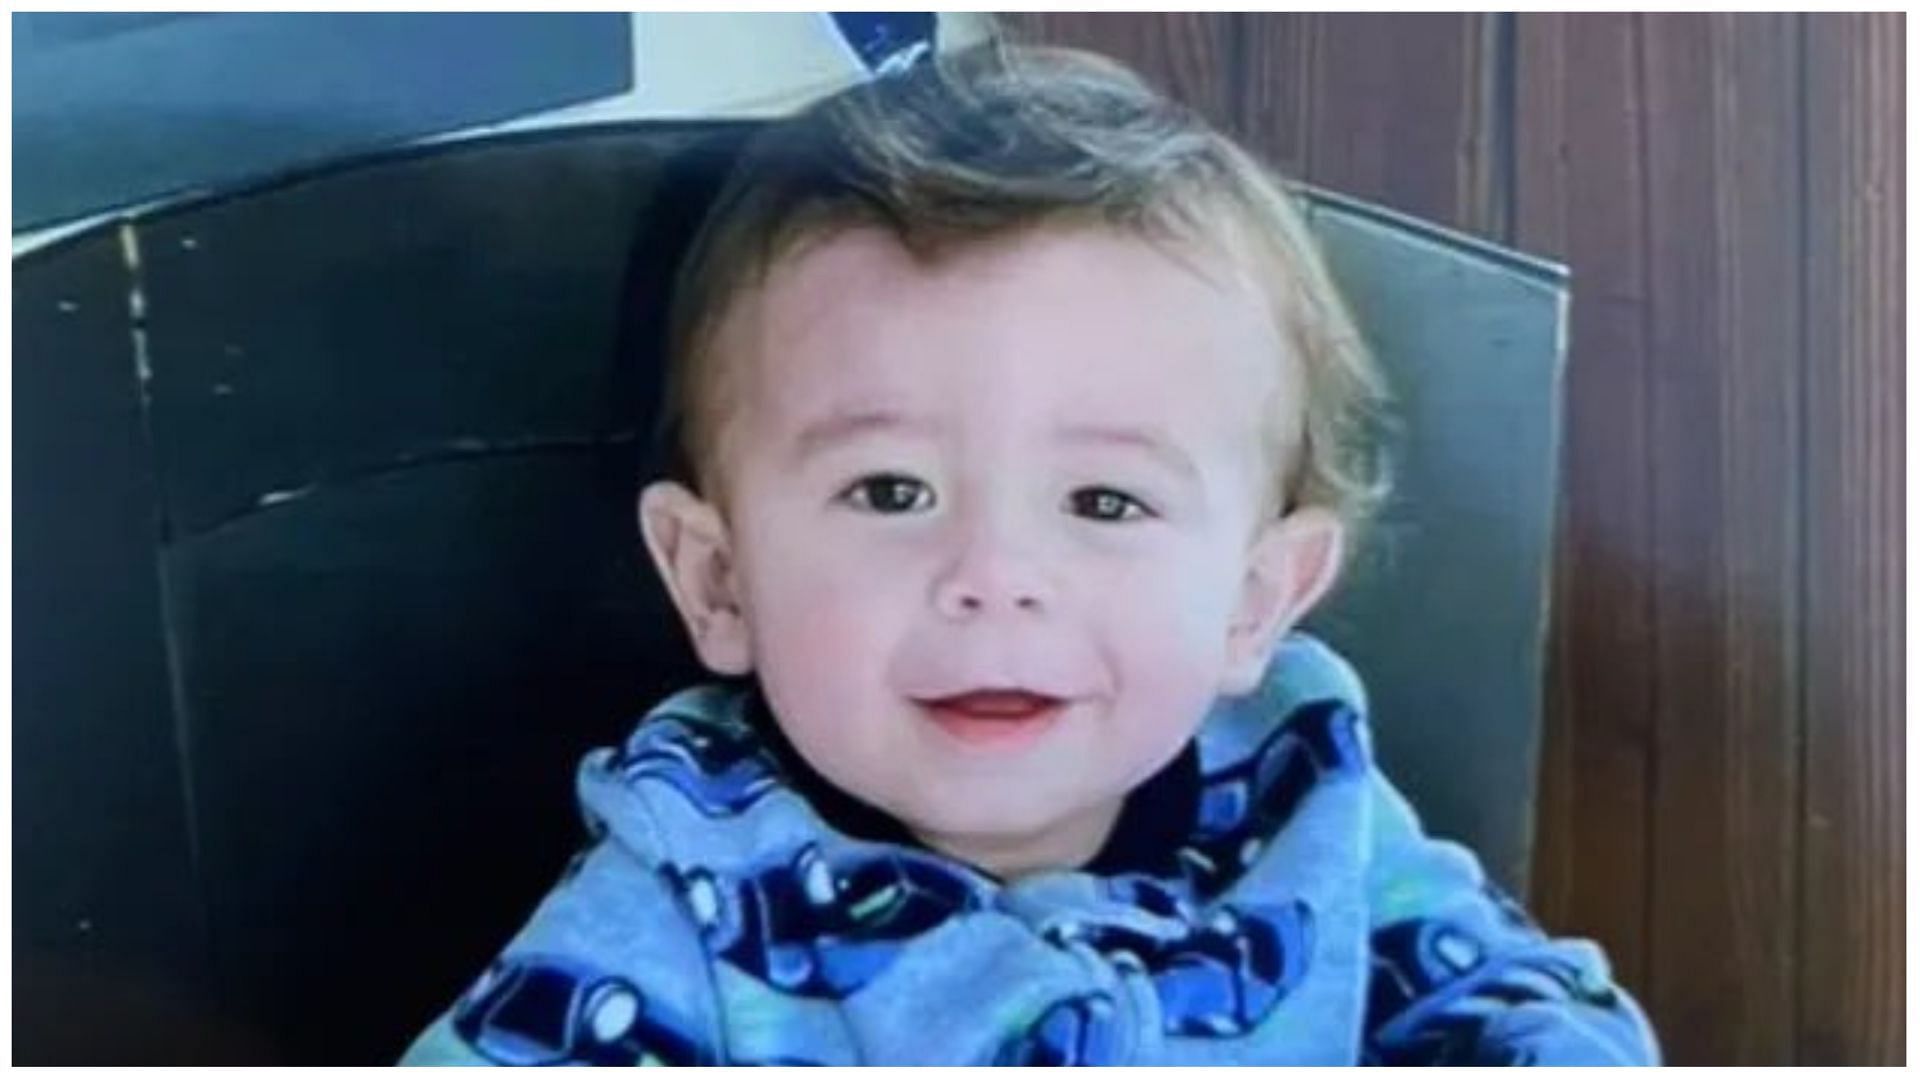 Despite extensive police search, 20-month-old Quinton Simon still remains missing (Image via the Chatham County Police Department)